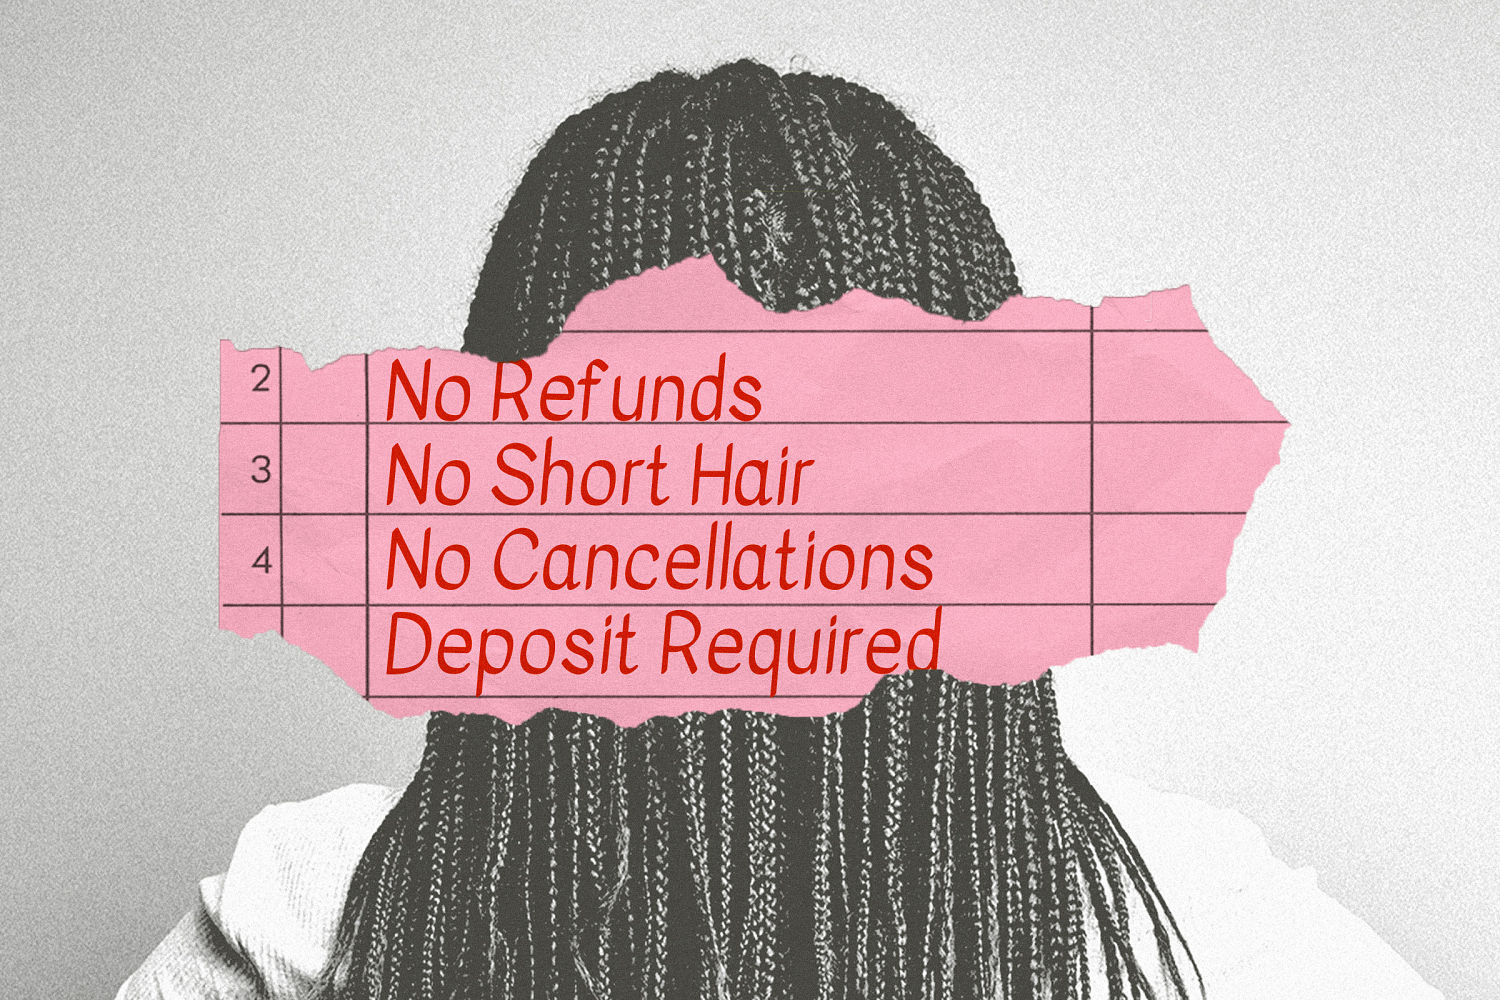 The complex battle between Black hairstylists and their clients